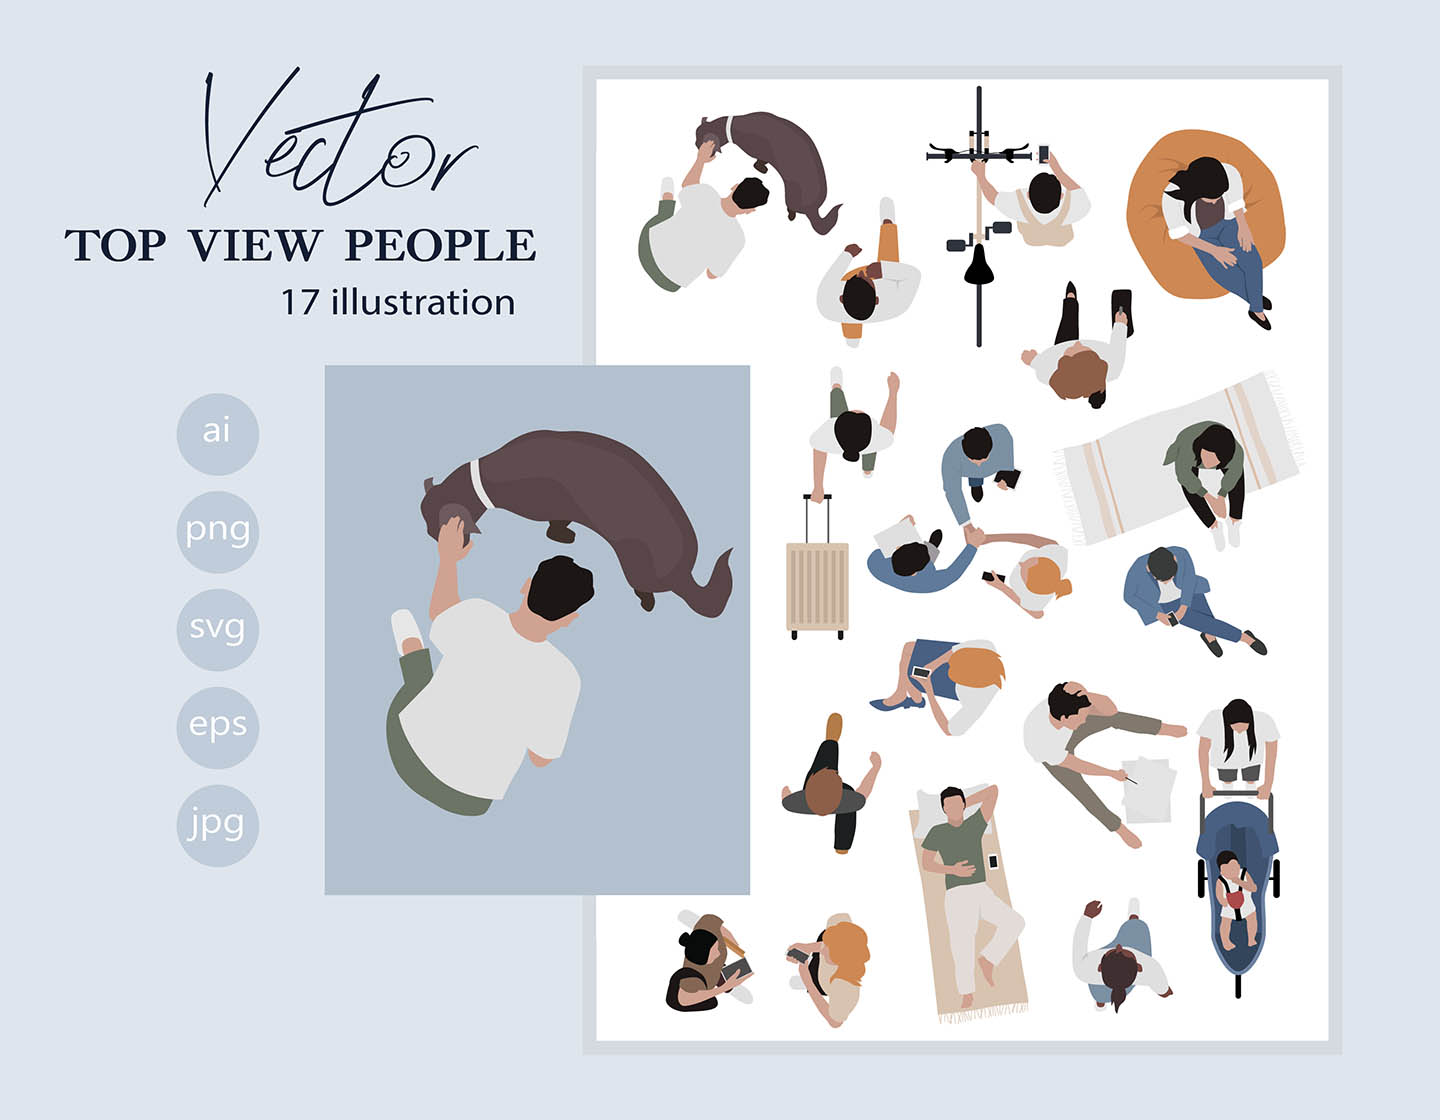 Top View People - Vector Illustration